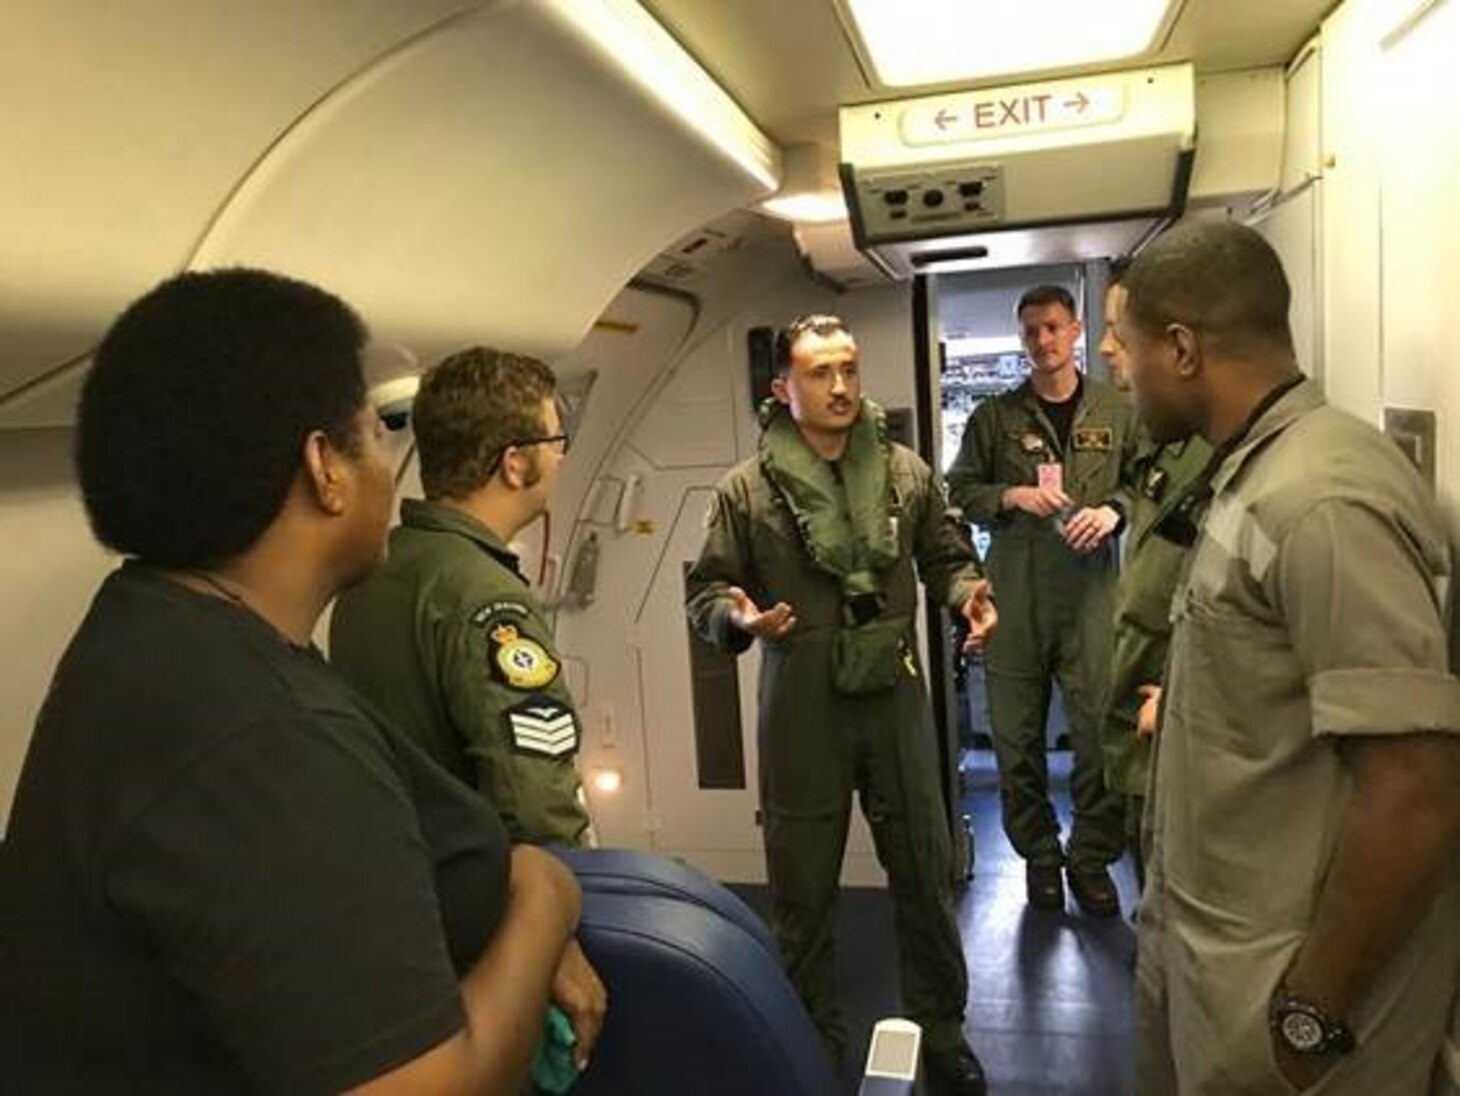 Nadi, FIJI (May 22, 2019) Naval Aircrewman (Operator) Richard JohnsonLee assigned to the “Fighting Tigers” of Patrol Squadron (VP) 8, gives a passenger brief to members of the Republic of Fiji Military Forces and Royal Australian Navy. VP-8 is deployed to the U.S. 7th Fleet (C7F) area of operations conducting maritime patrol and reconnaissance operations in support of Commander, Task Force 72, C7F, and U.S. Indo-Pacific Command objectives throughout the Indo-Pacific region.